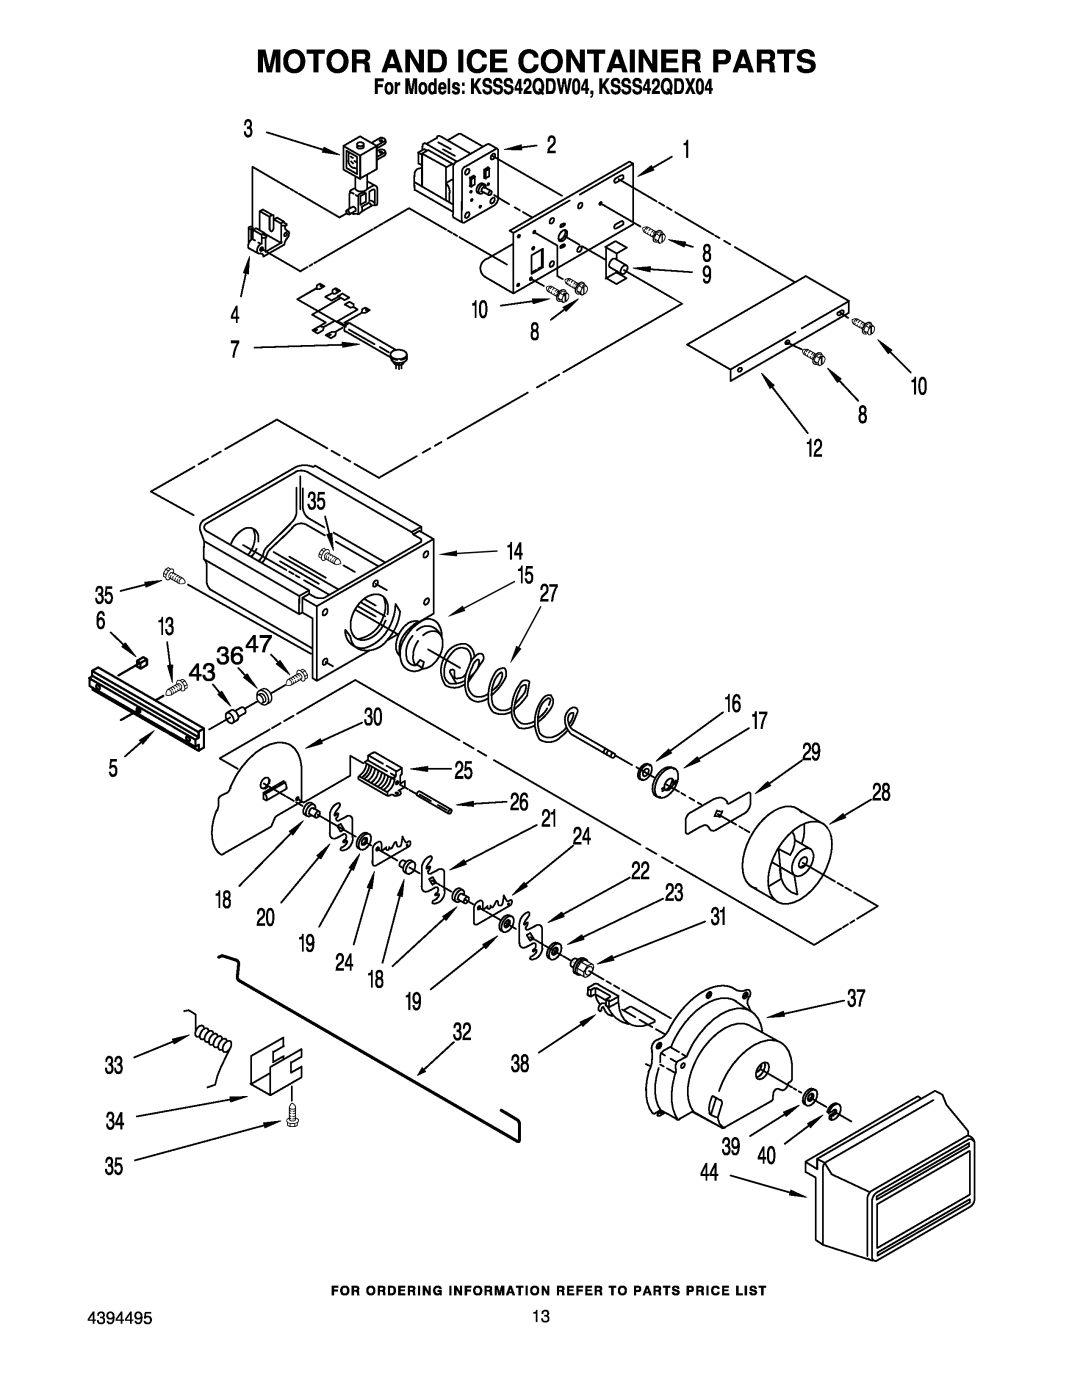 KitchenAid manual Motor And Ice Container Parts, For Models KSSS42QDW04, KSSS42QDX04 